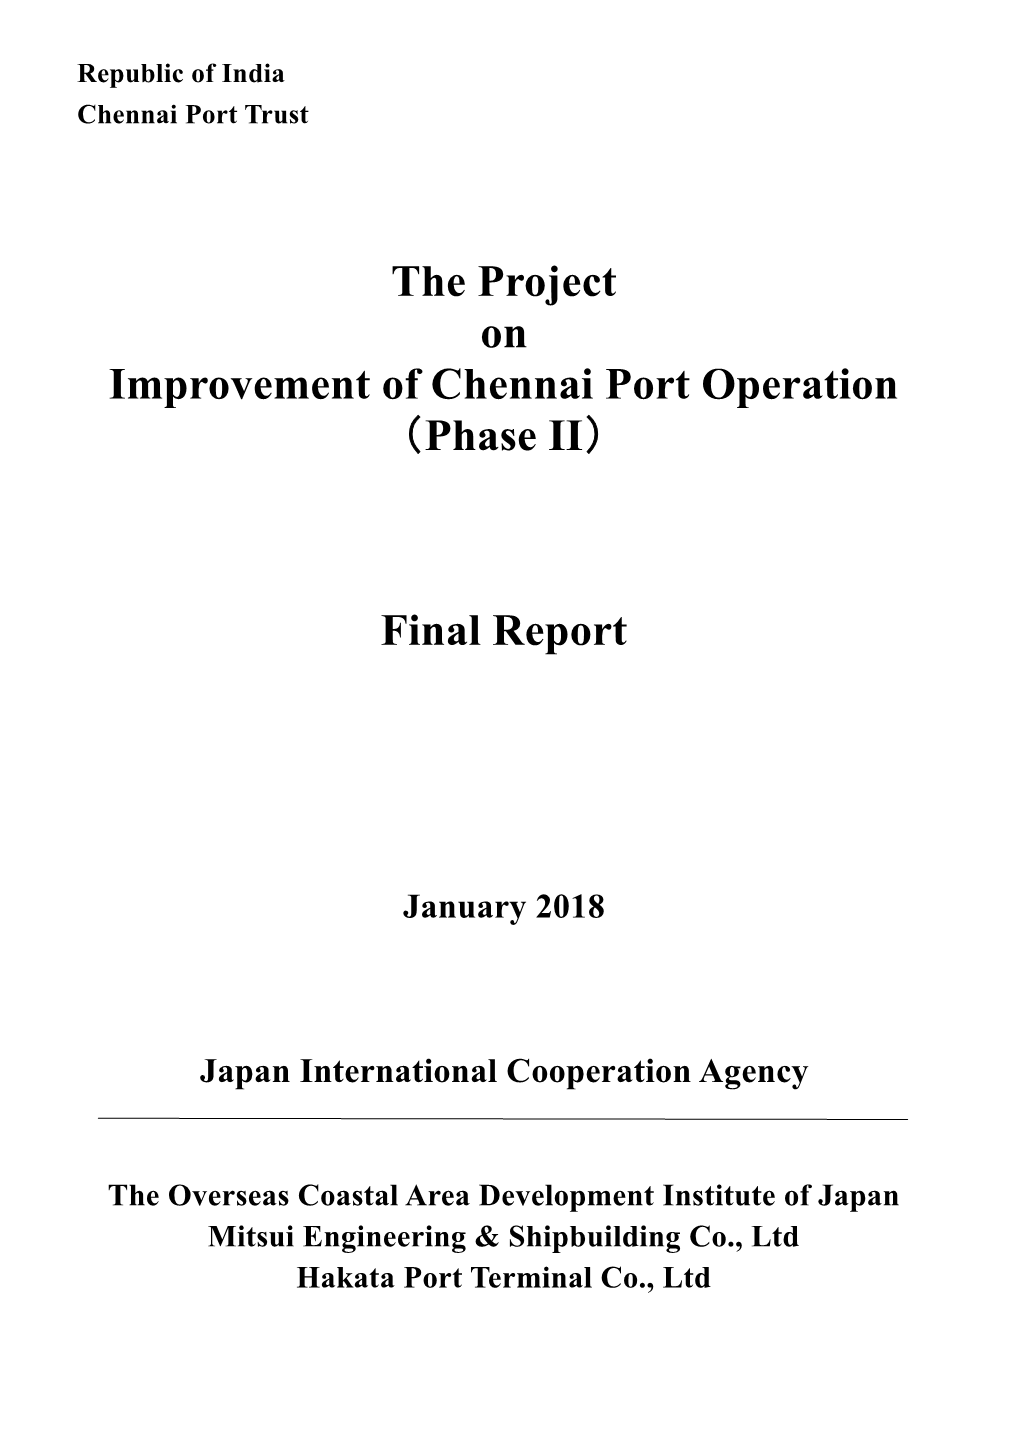 The Project on Improvement of Chennai Port Operation （Phase II）